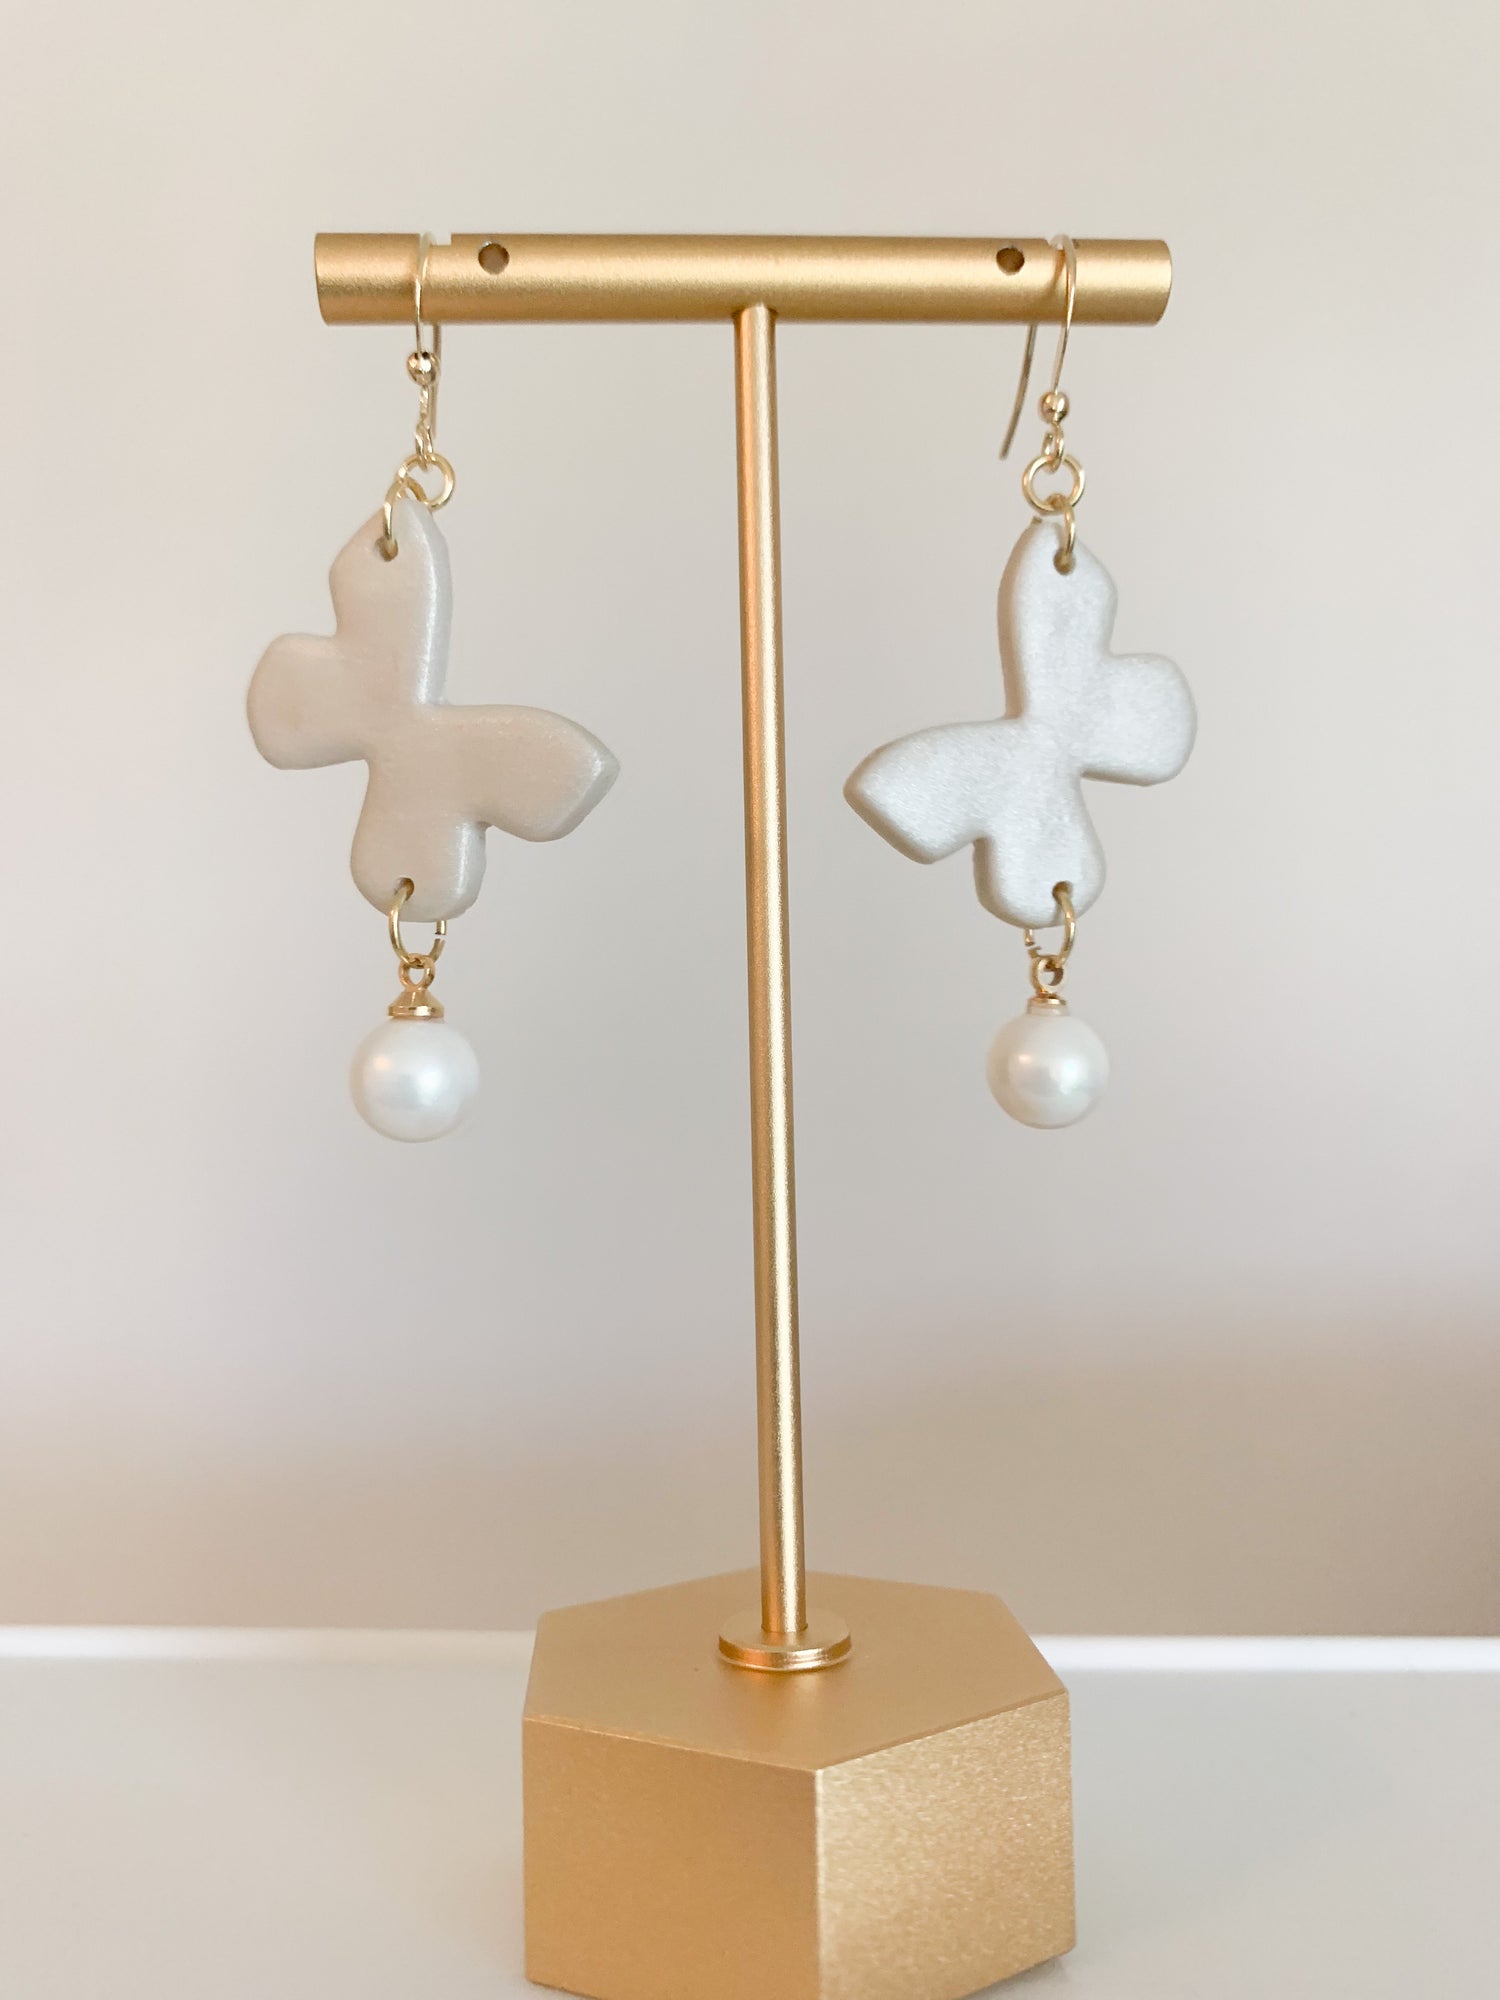 A pair of handcrafted polymer clay earrings featuring 18K gold plated earring posts and a mini pearl